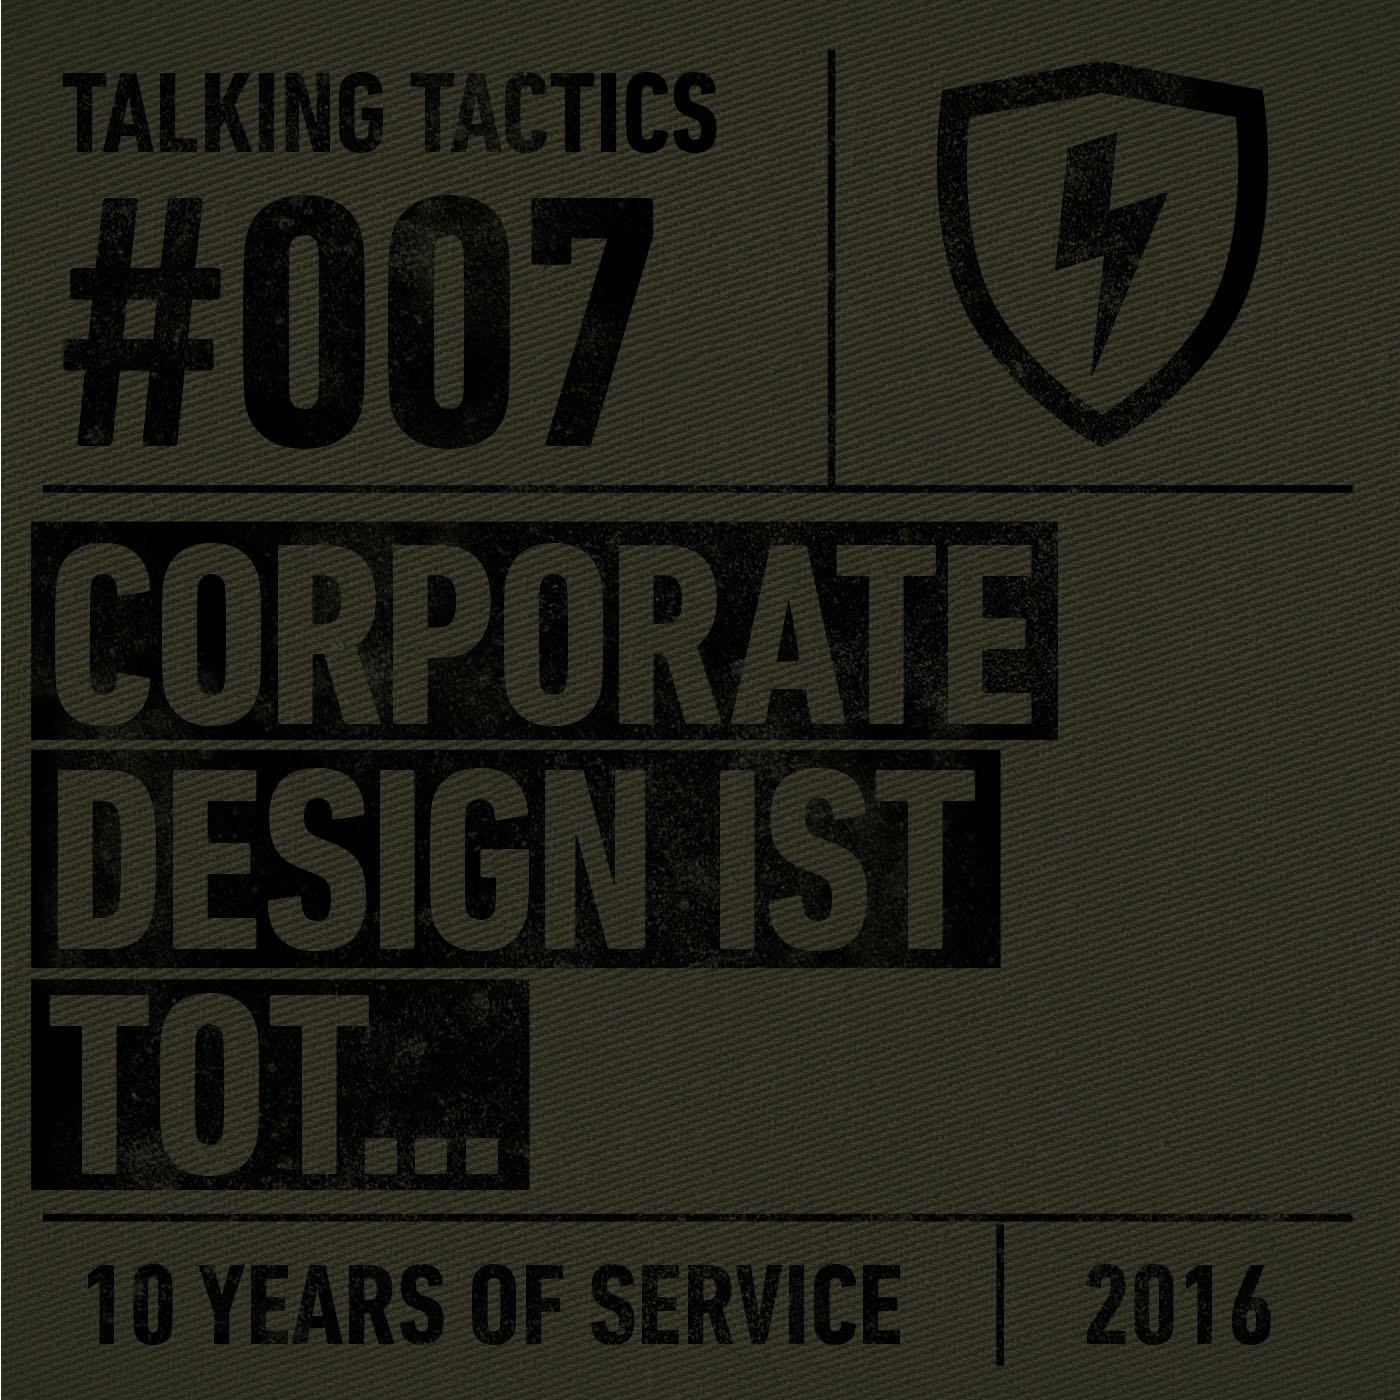 #007 - Corporate Design ist Tod, lang lebe Corporate Communication